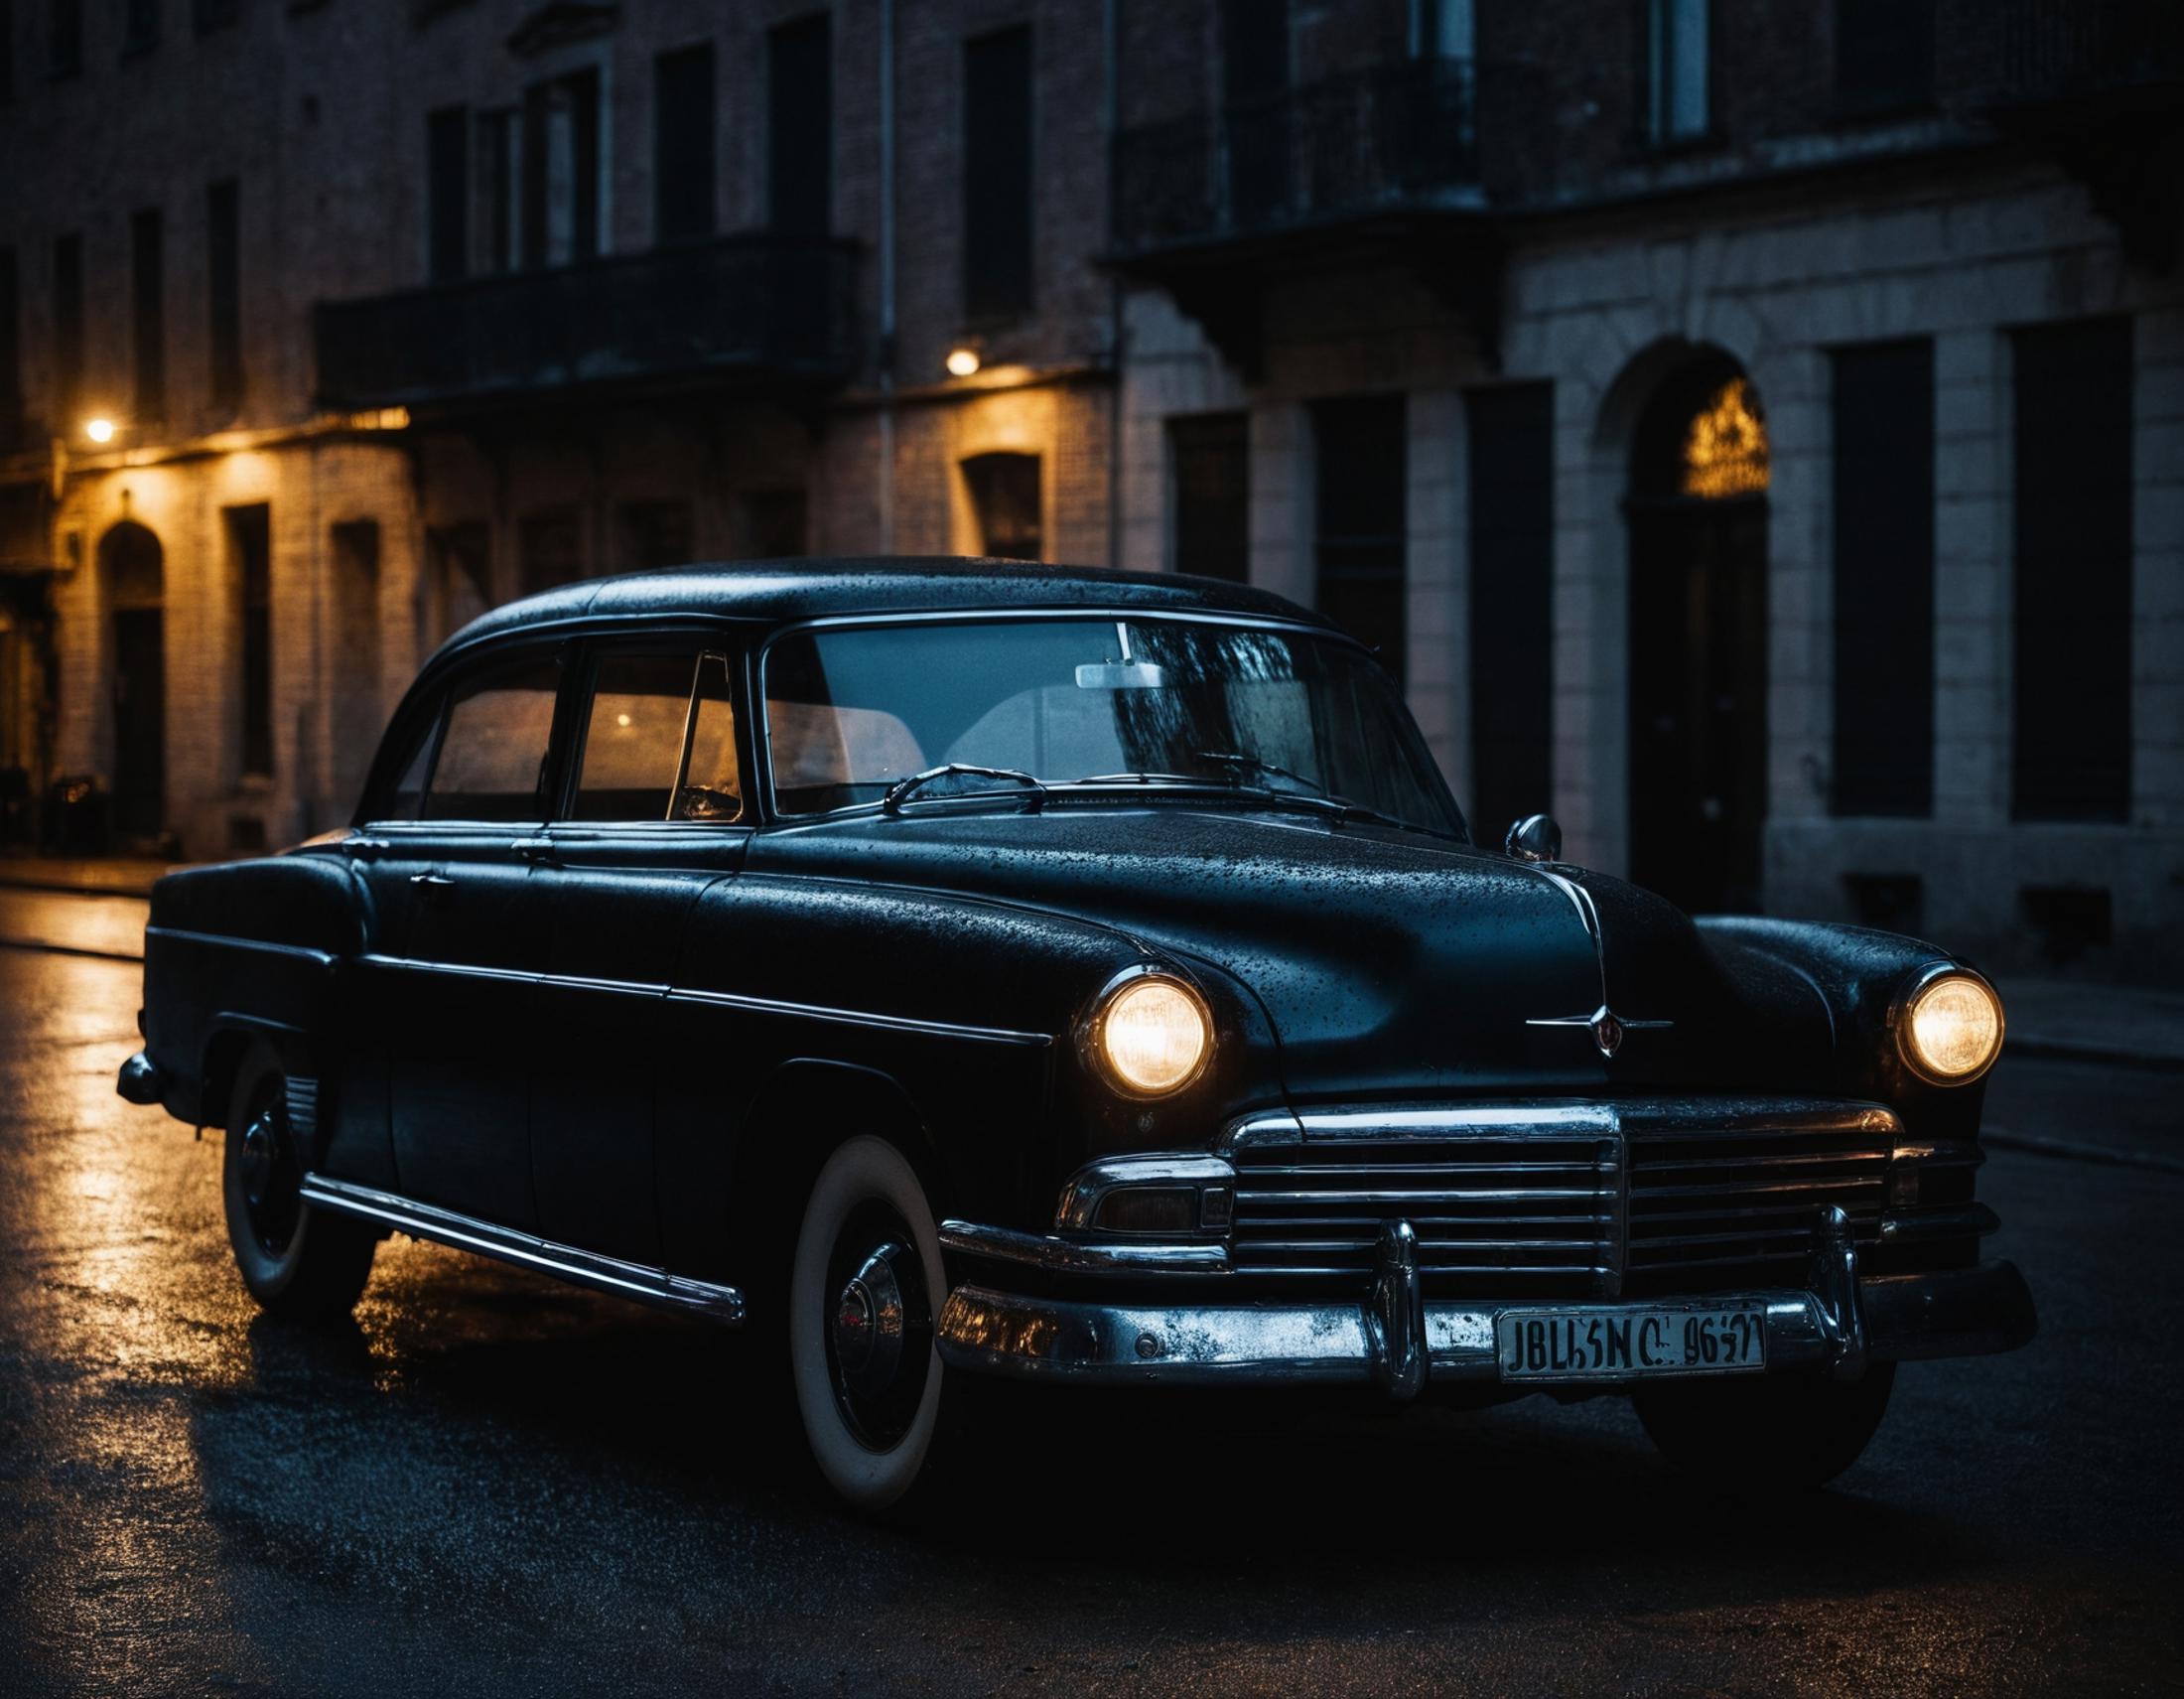 Vintage Black Car Parked on the Street at Night.